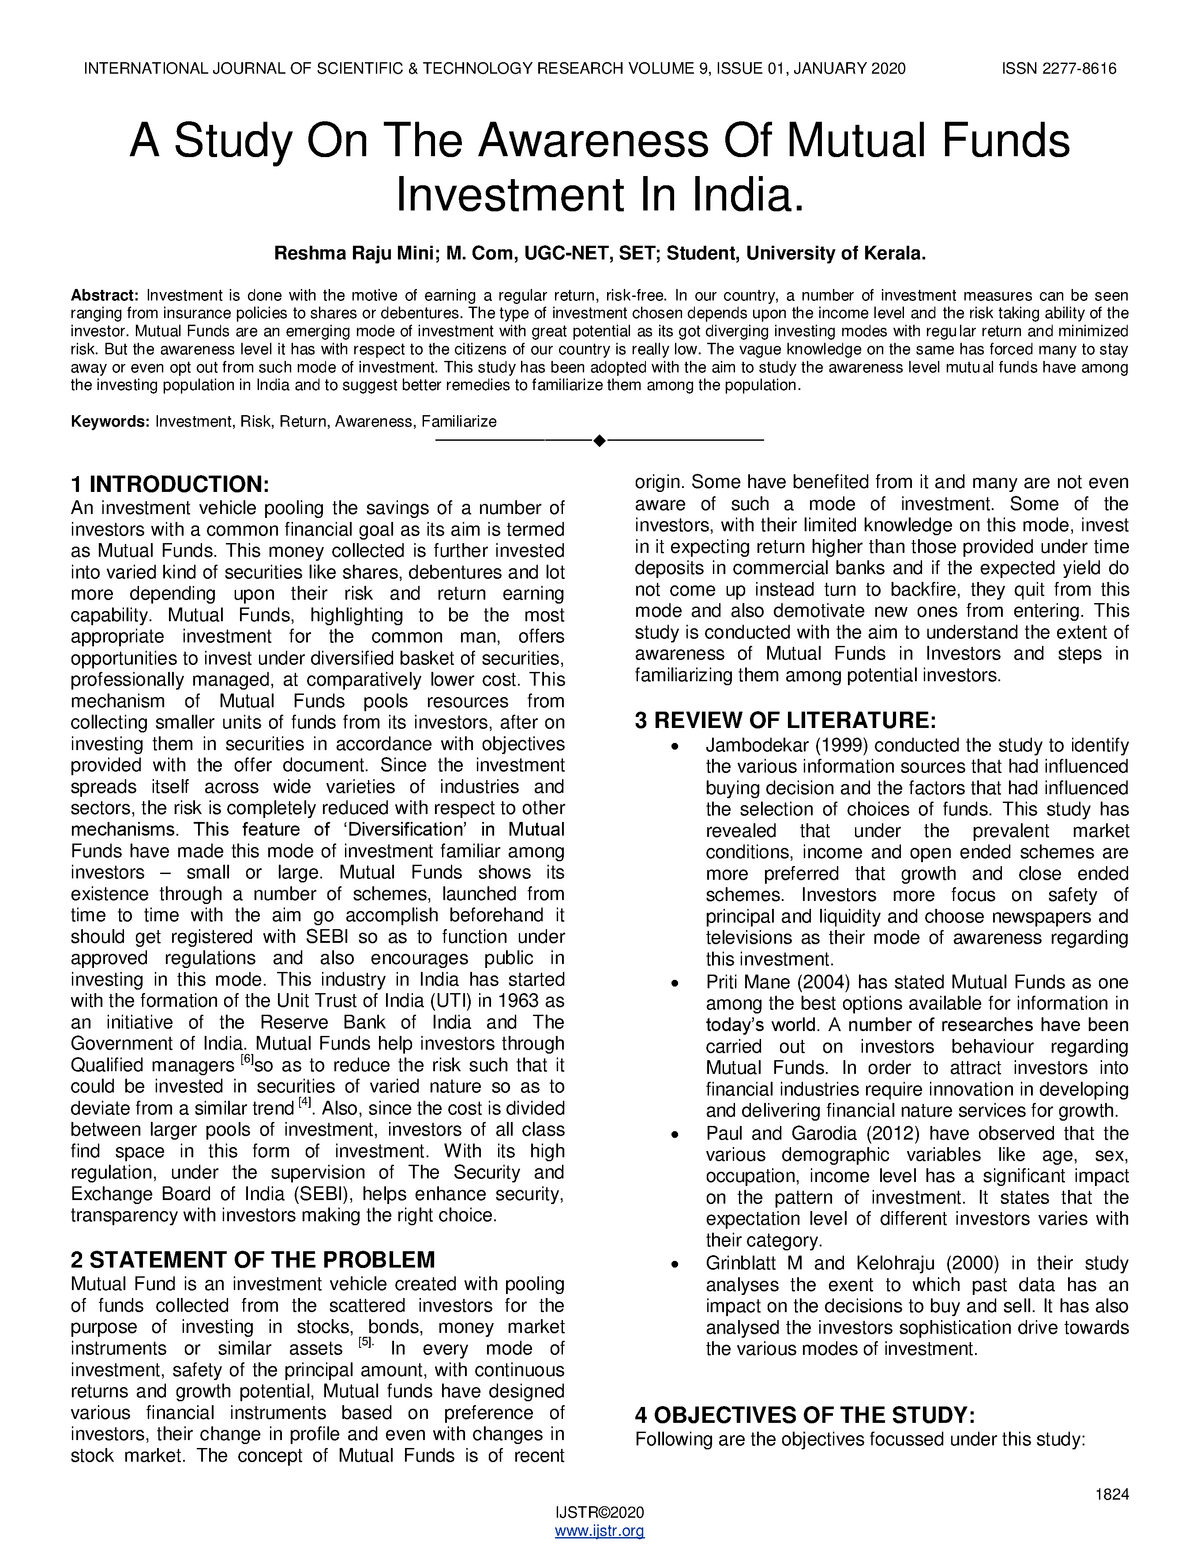 research topics on mutual funds in india